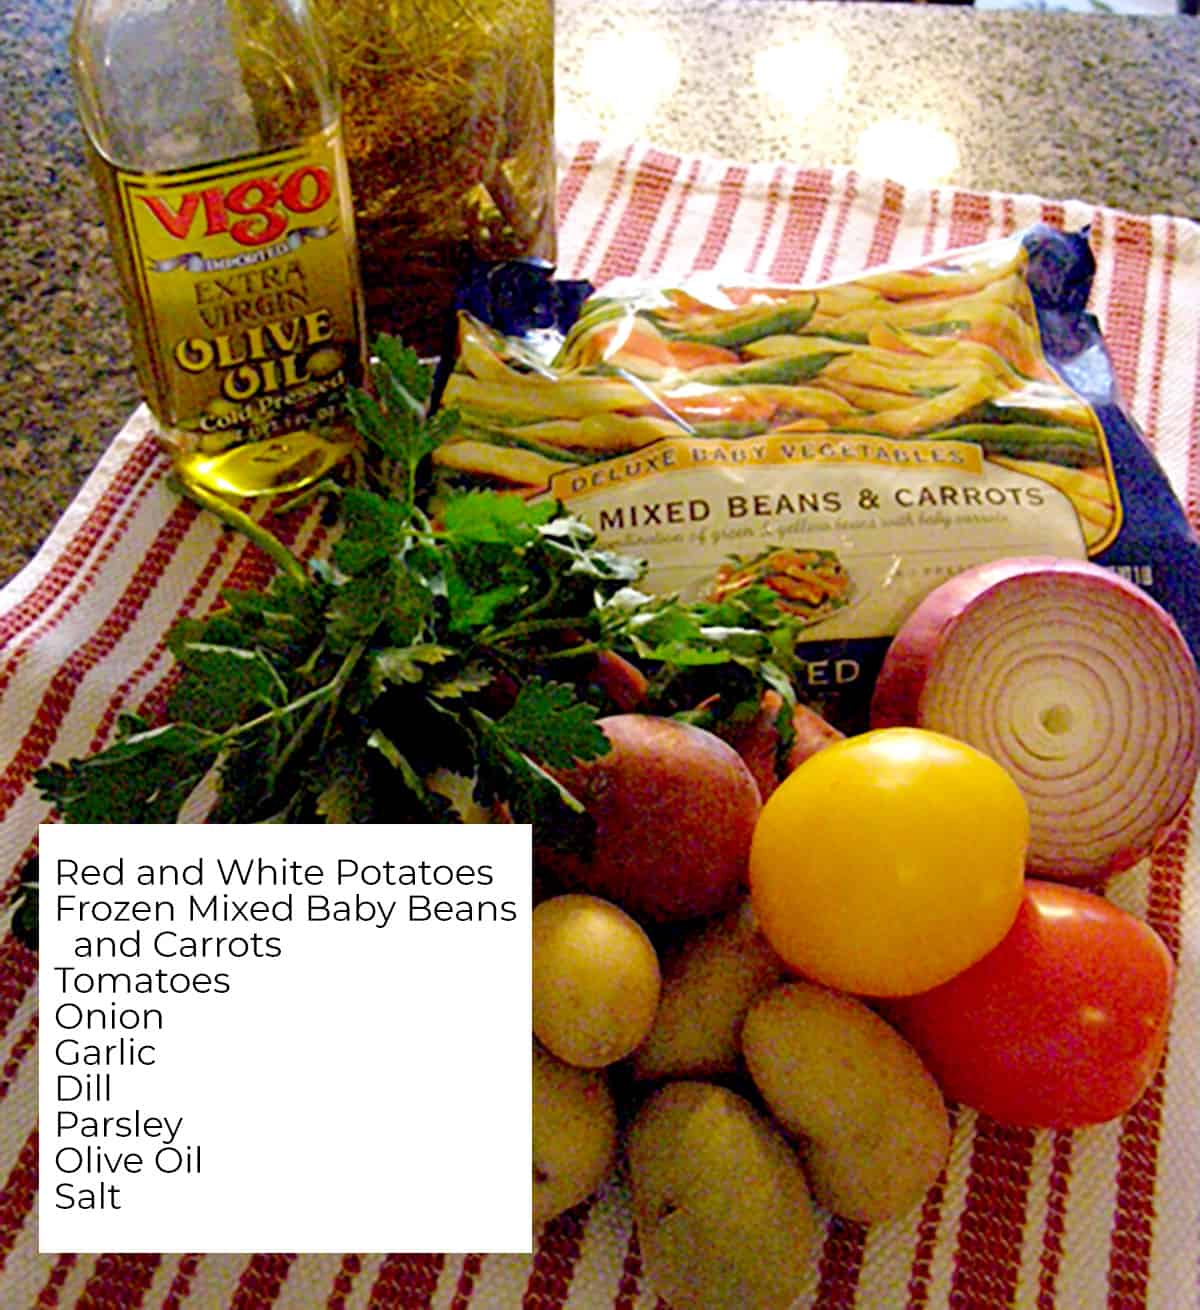 All ingredients needed for the recipe.